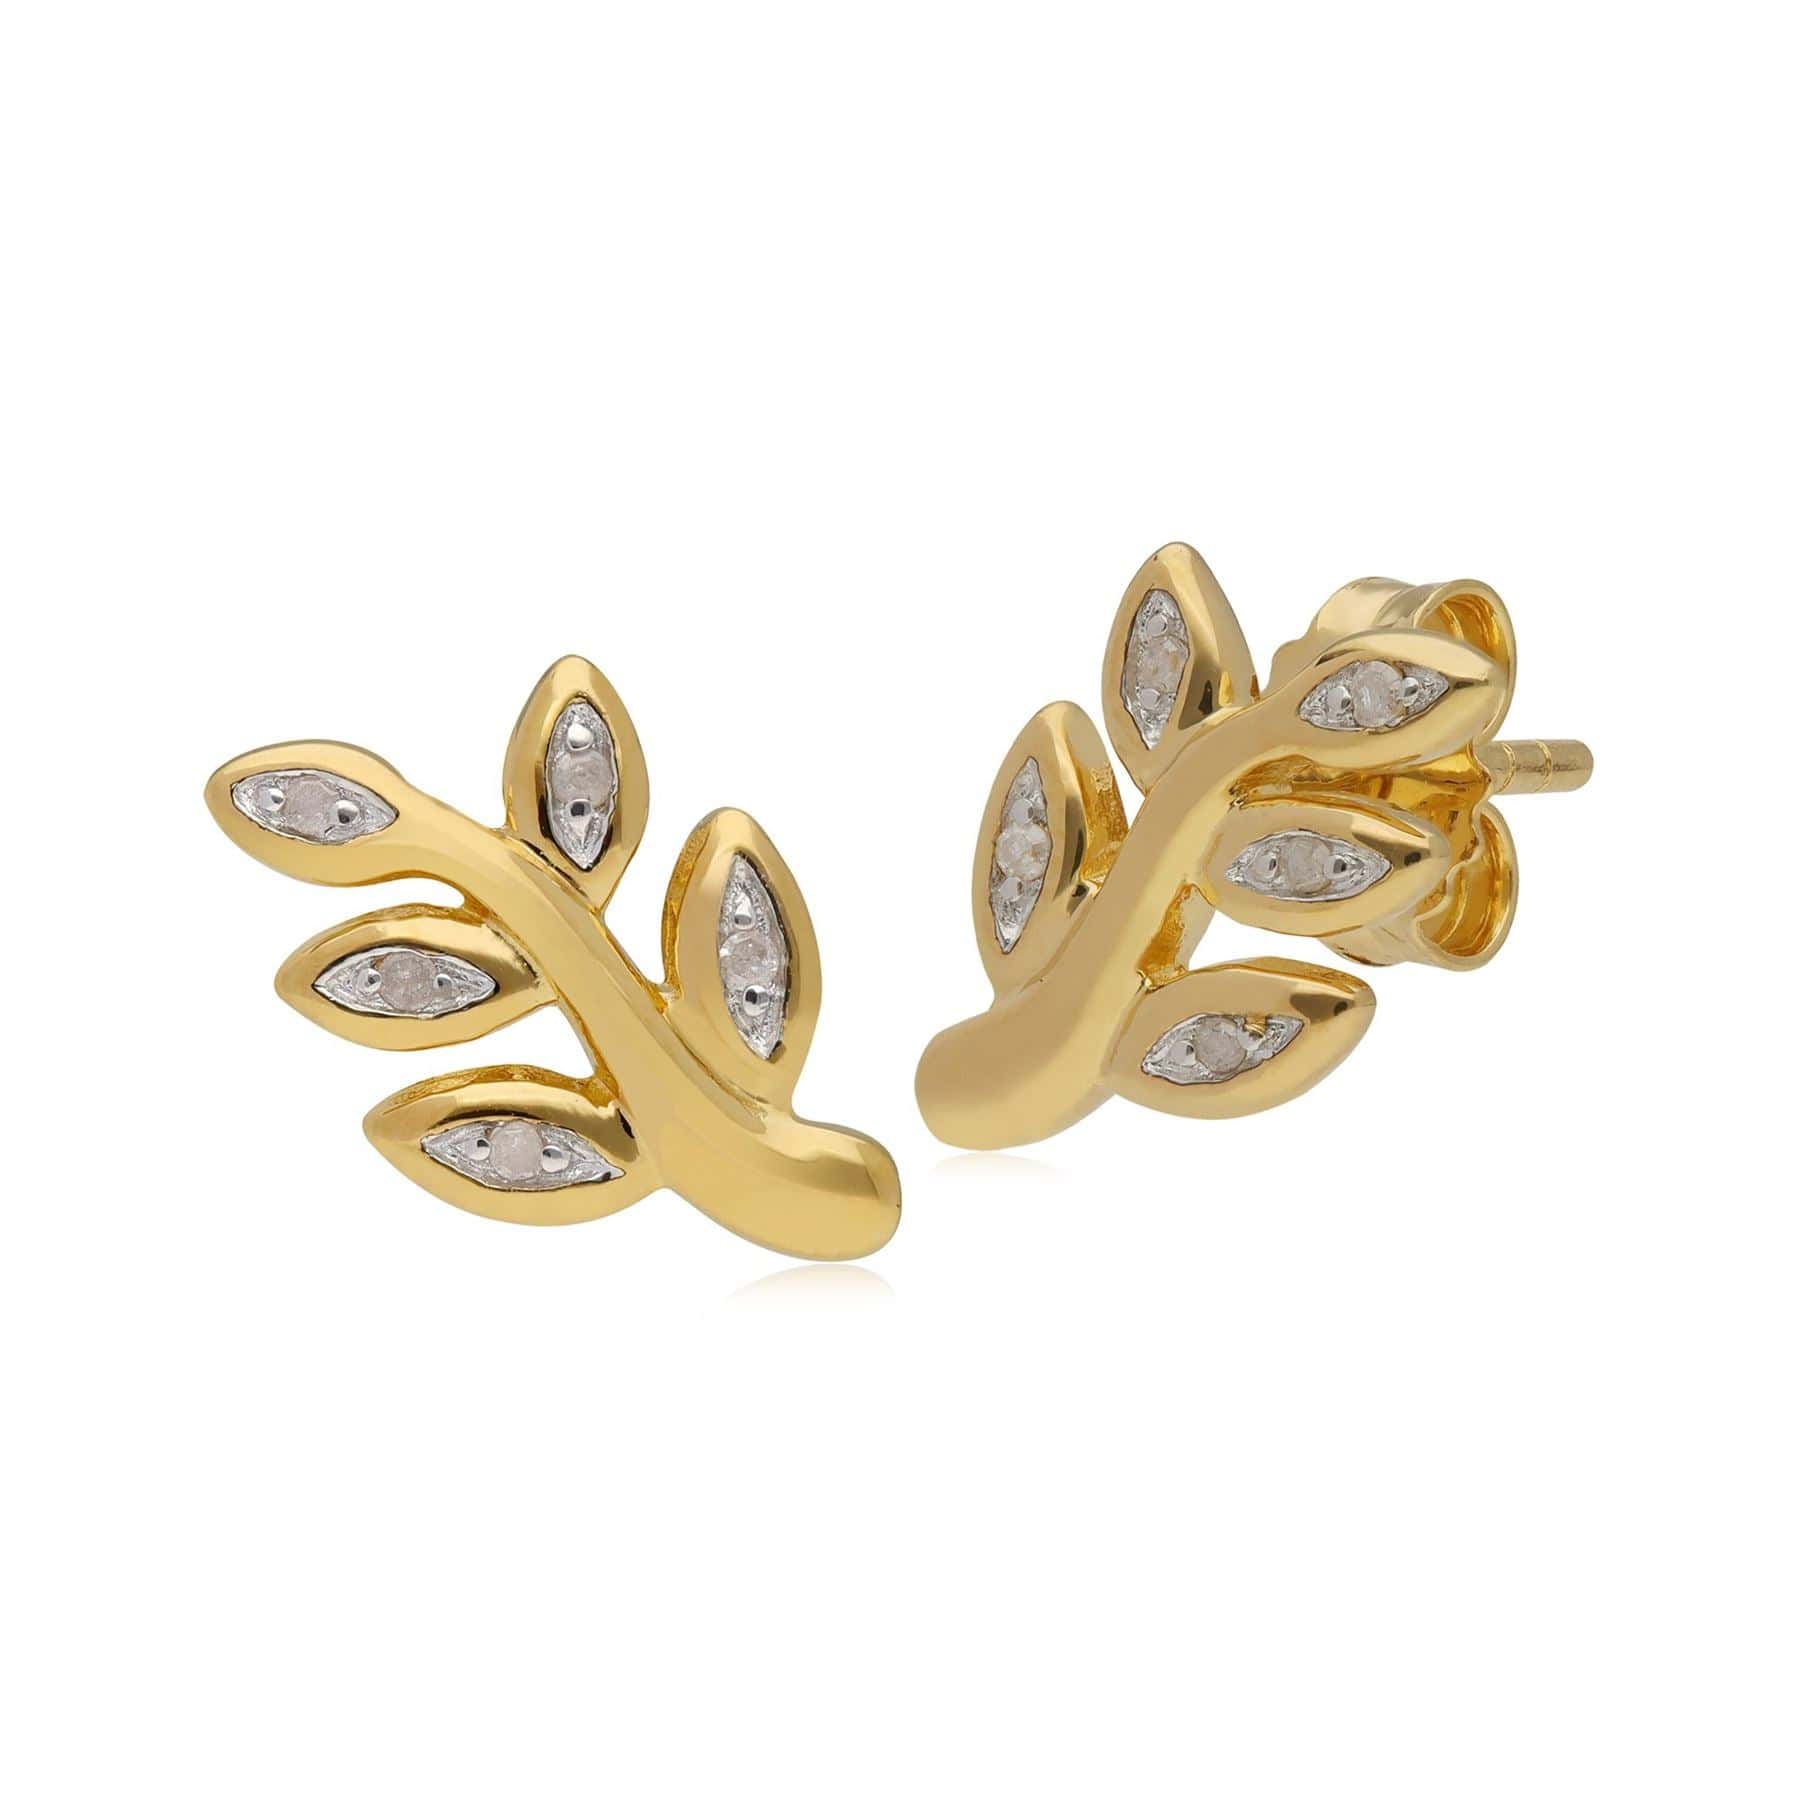 T1039E9096 Kosmos Diamond Leaf Shaped Stud Earrings in Yellow Gold Plated Sterling Silver 1